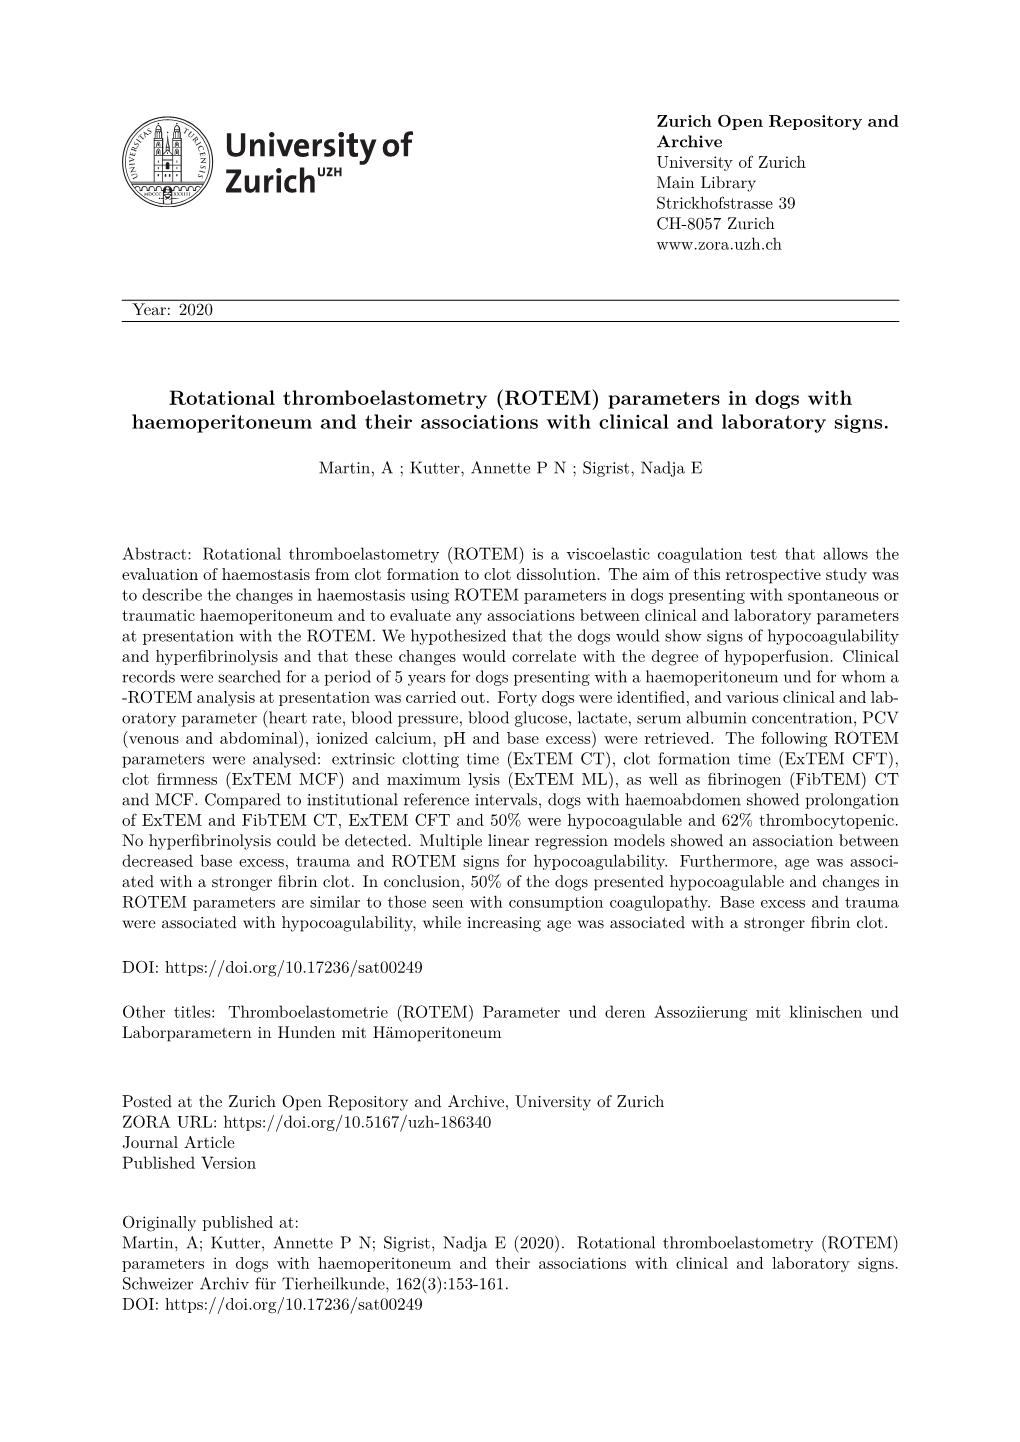 Rotational Thromboelastometry (ROTEM) Parameters in Dogs with Haemoperito- Neum and Their Associations with Clinical and Laboratory Signs A